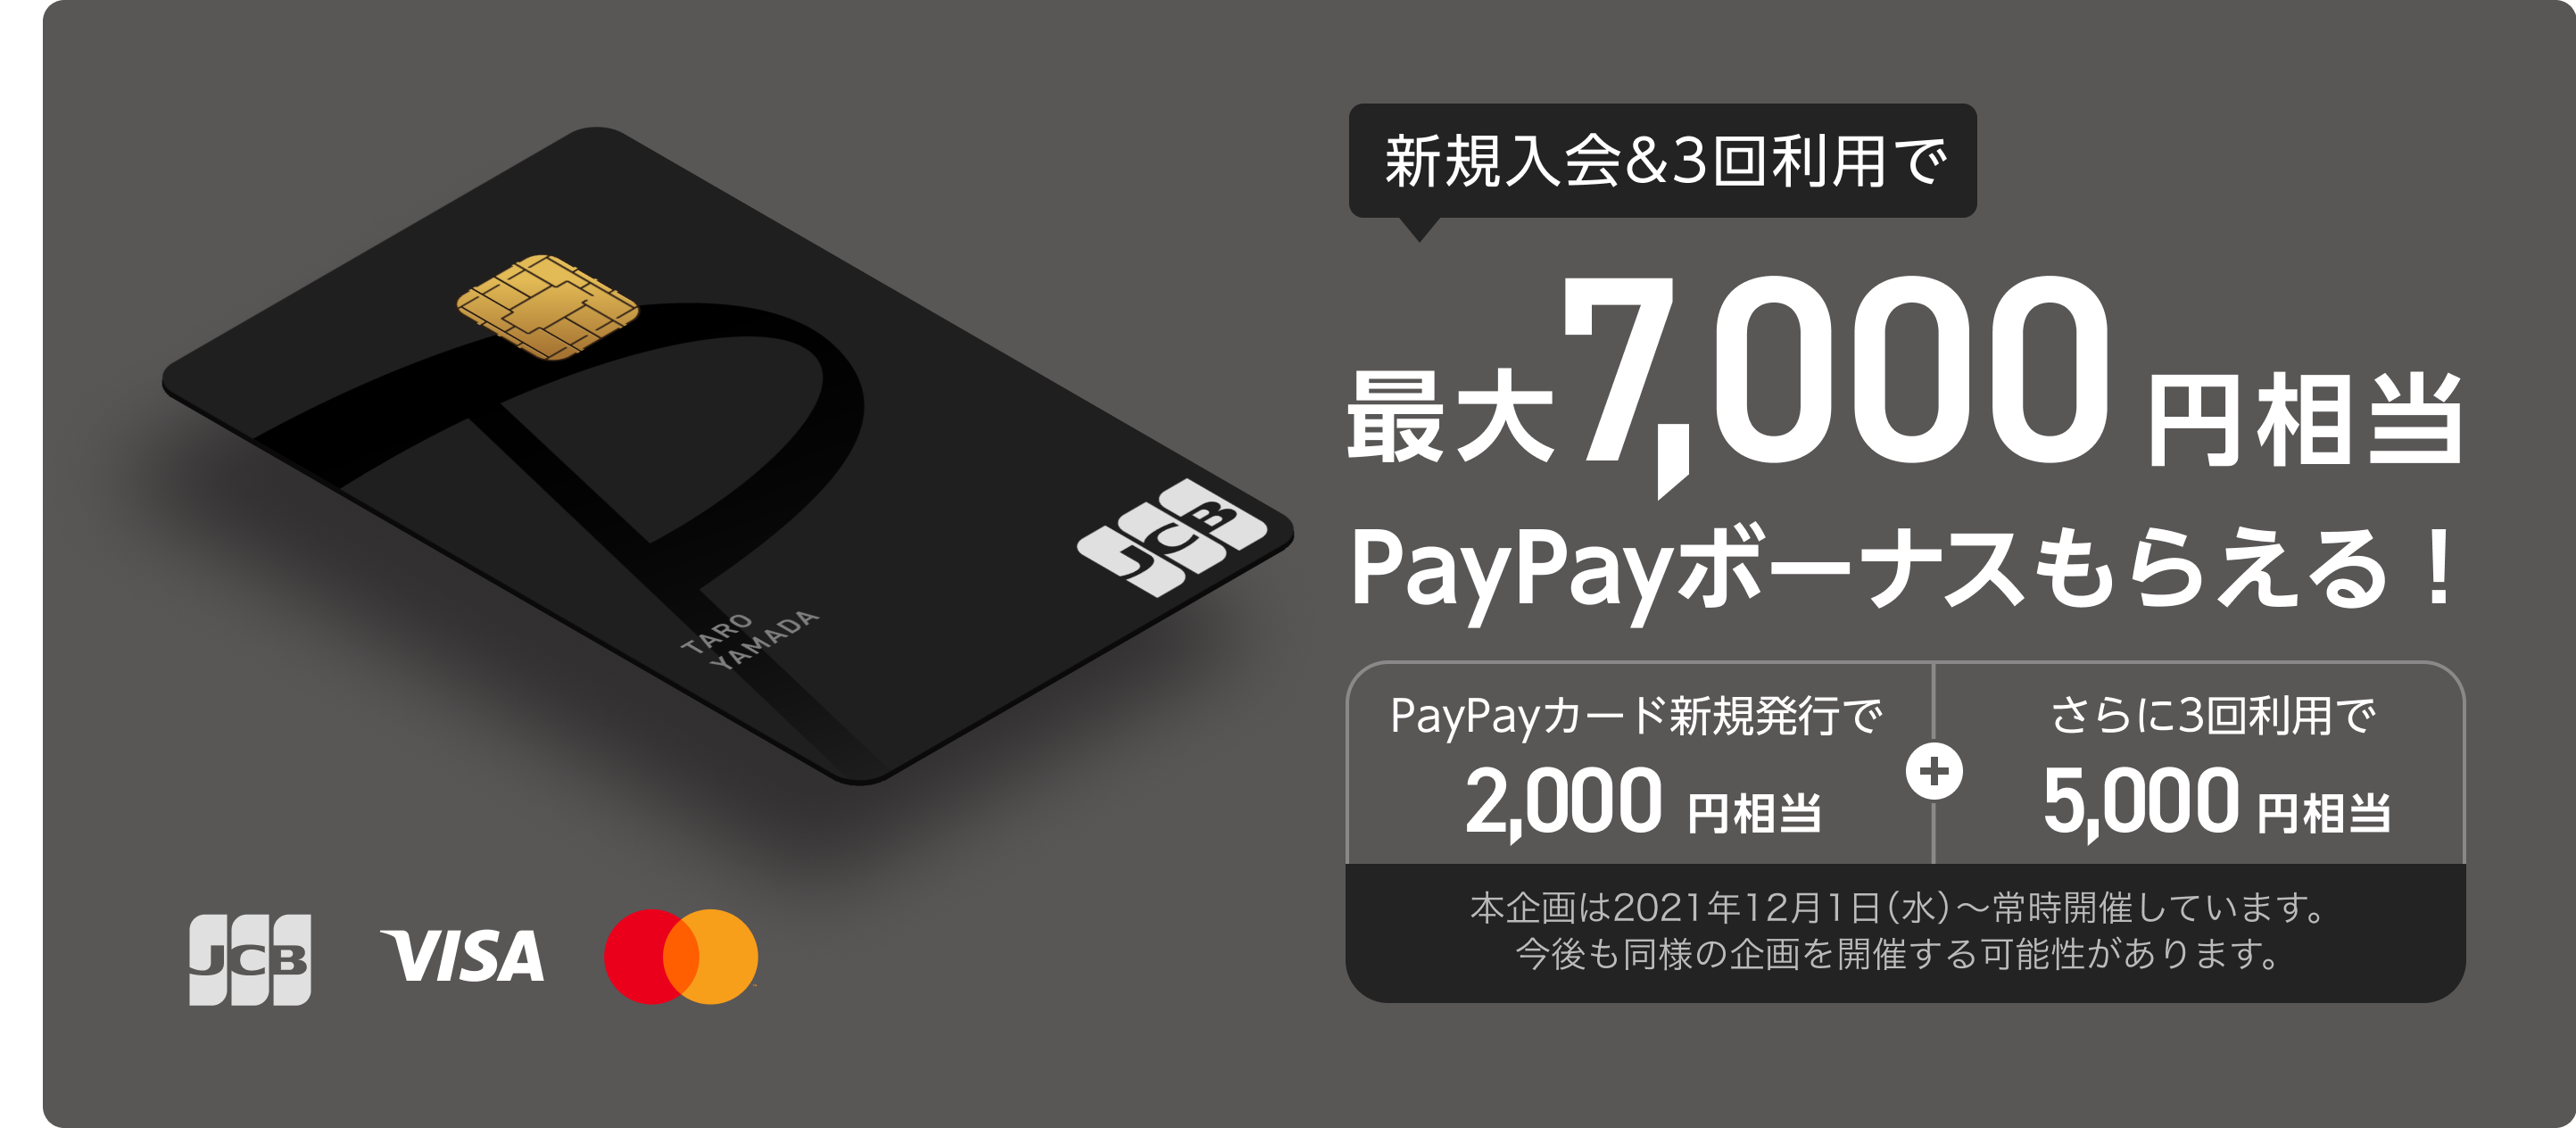 paypaycard_release_07